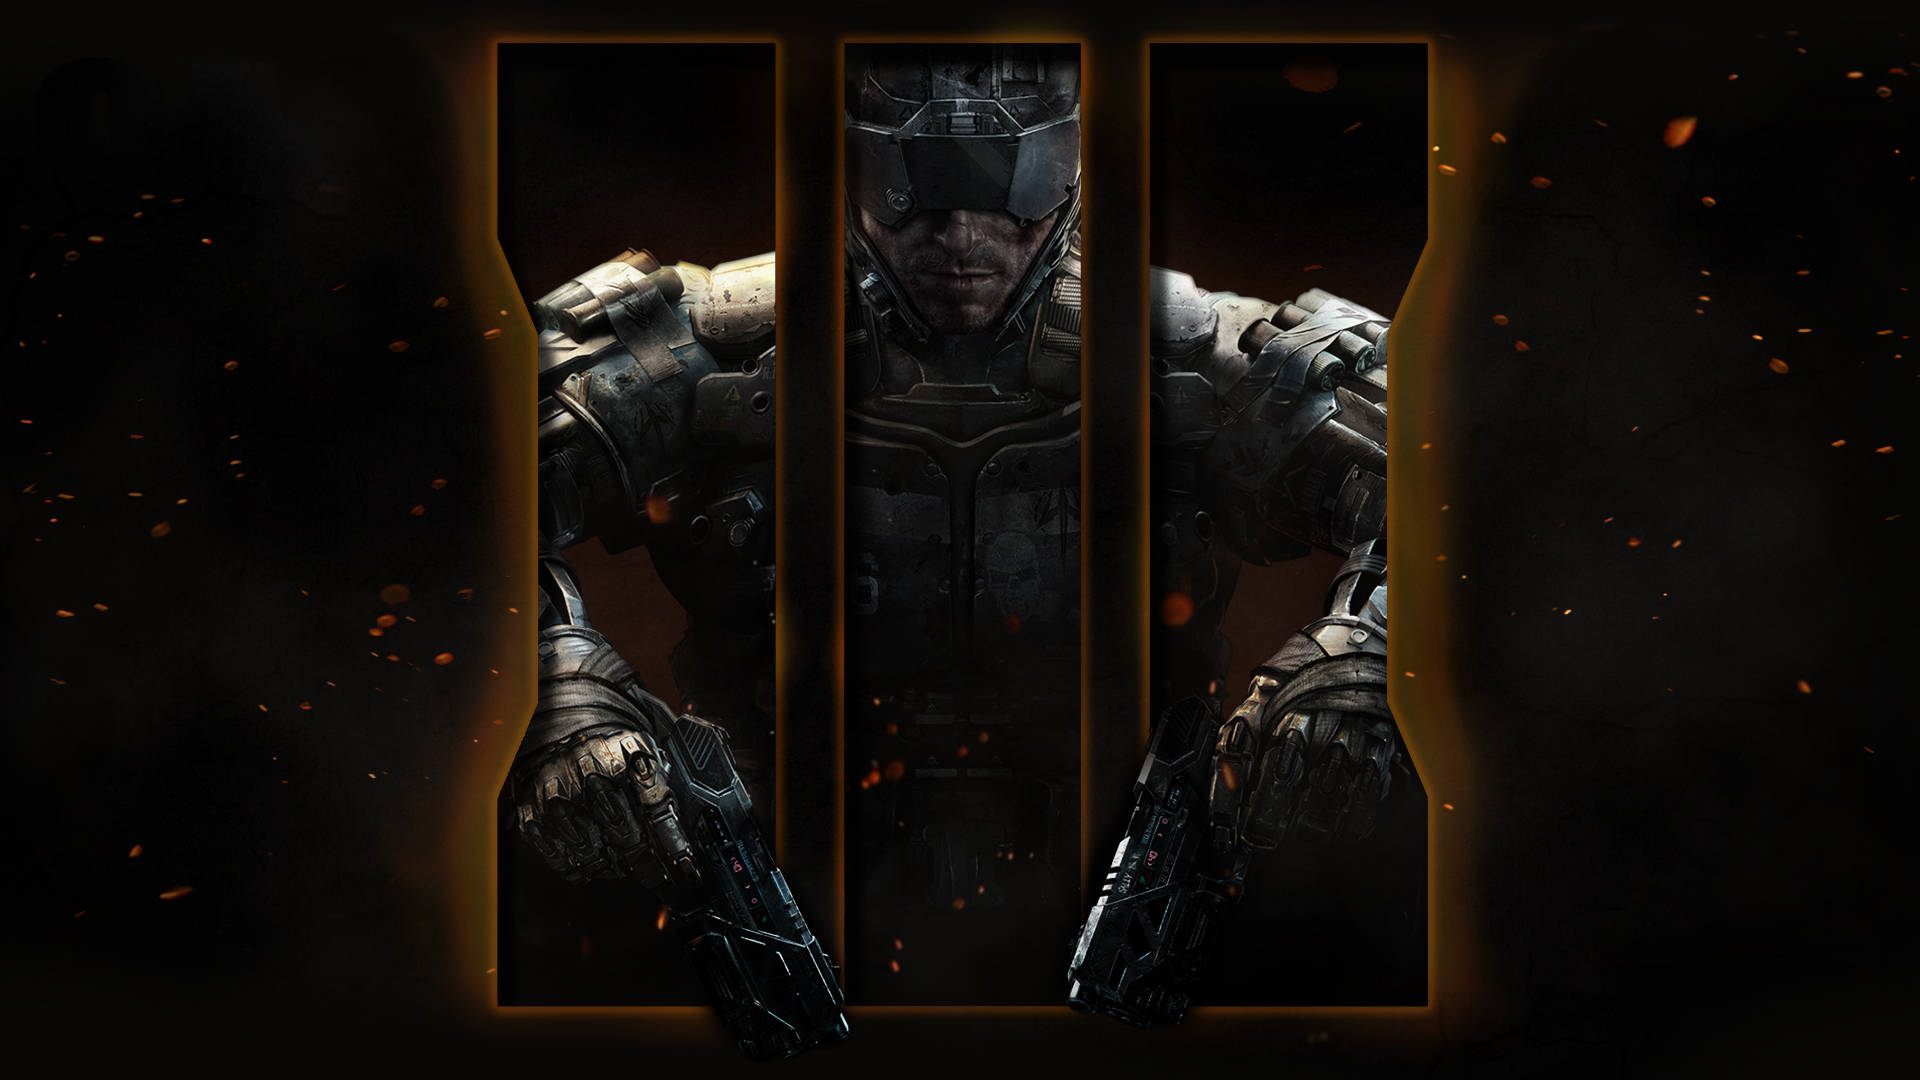 Join the fray with Call of Duty Black Ops 3 Wallpaper